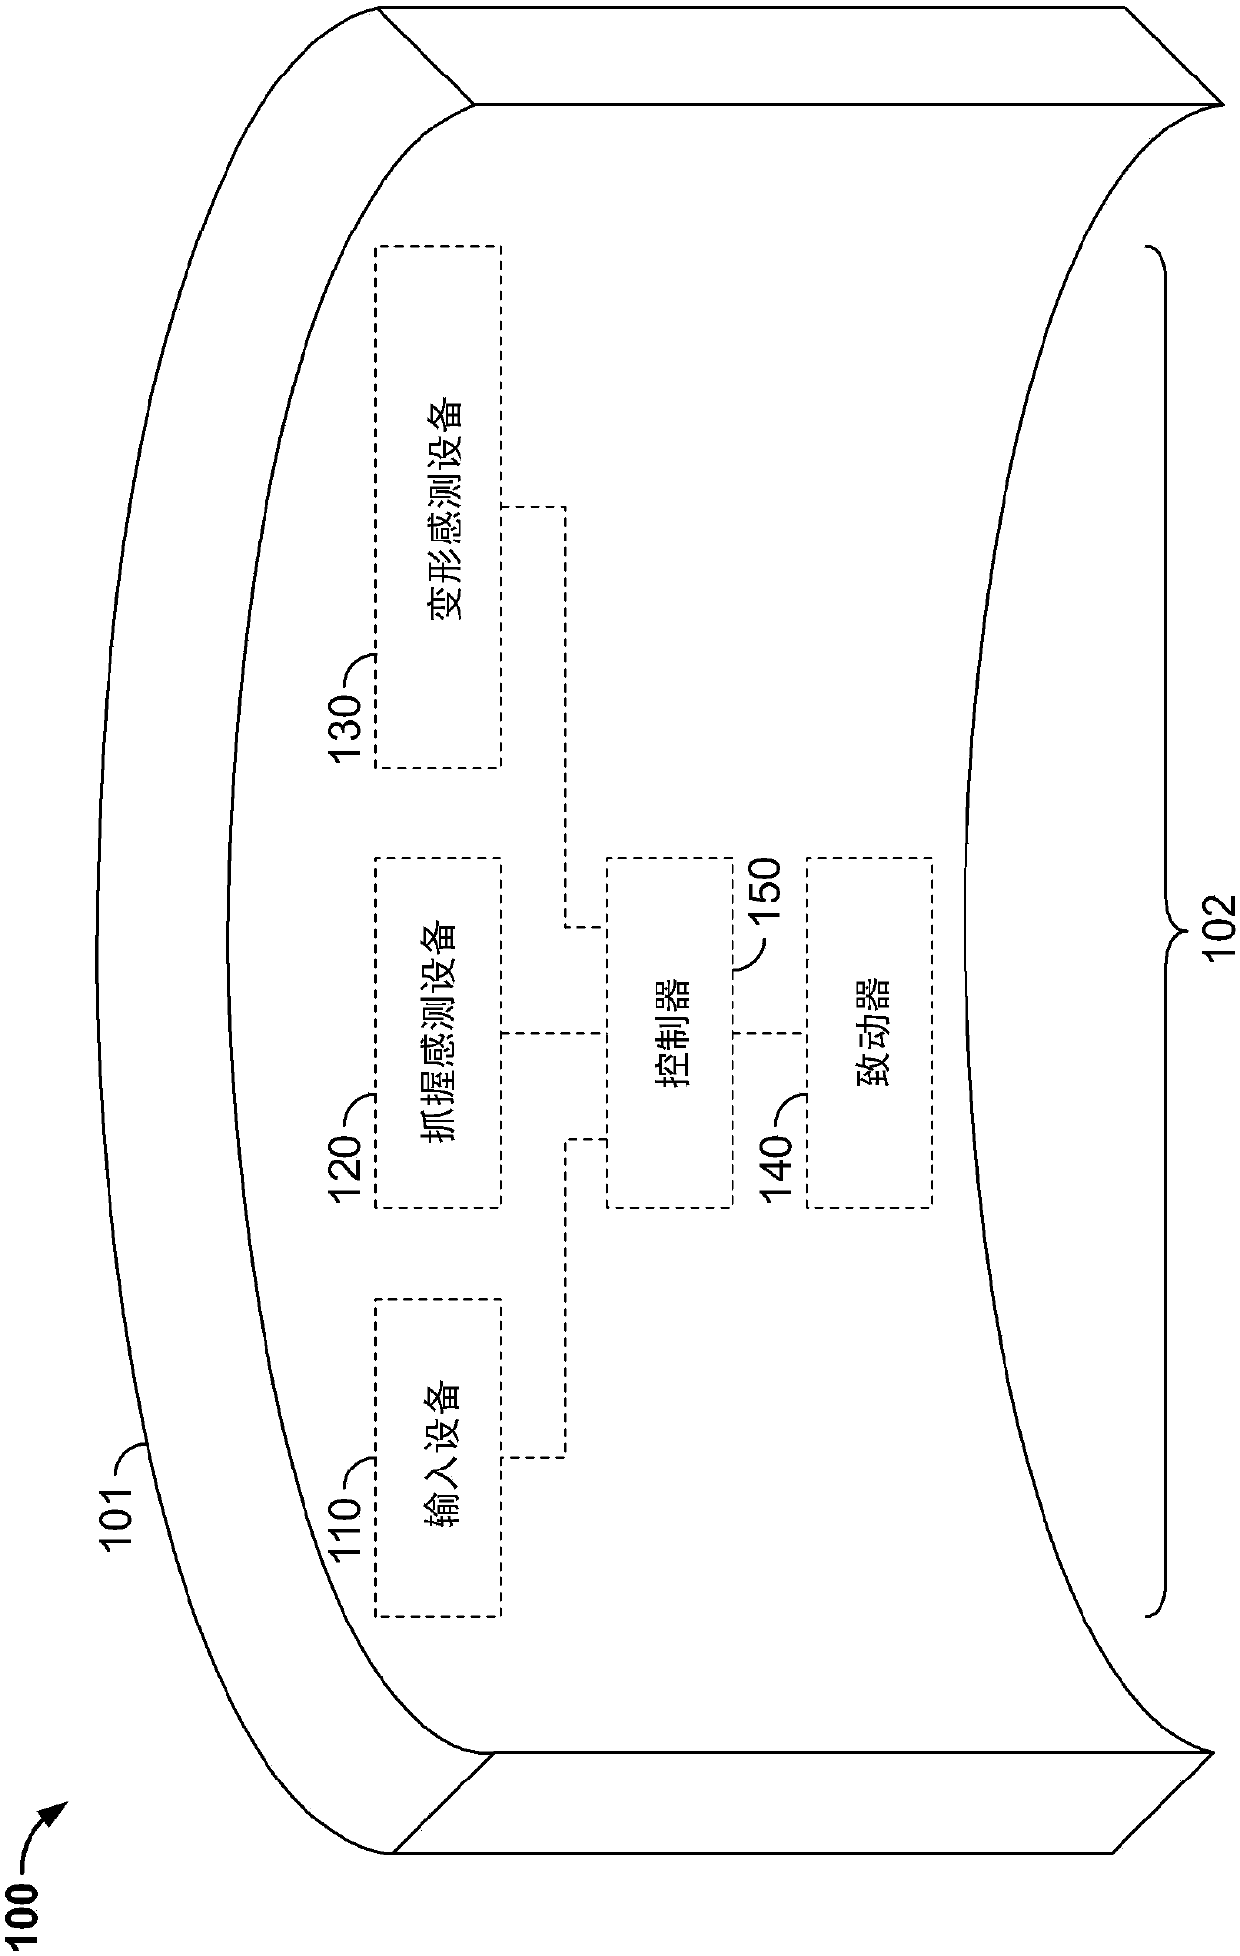 Compensated haptic rendering for flexible electronic devices